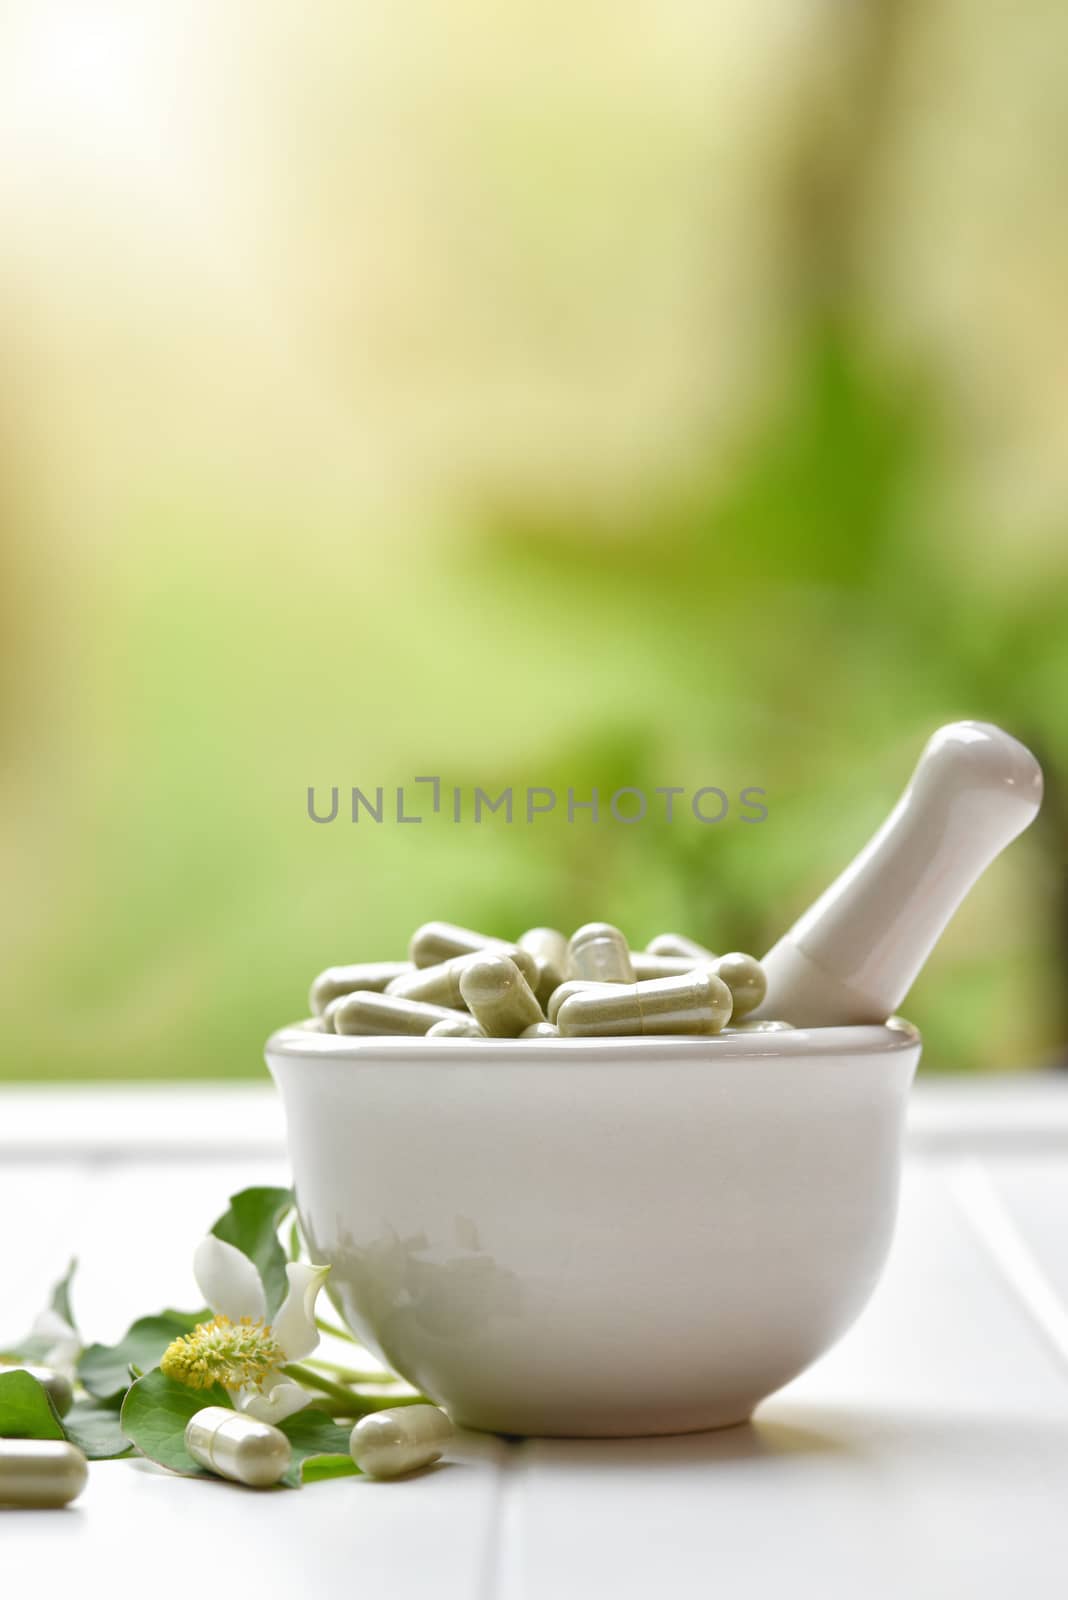 Herbal medicine in capsules from Houttuynia cordata or chameleon fish mint leaf  on white background. with copy space for medical background, healthy eating with natural product for good living